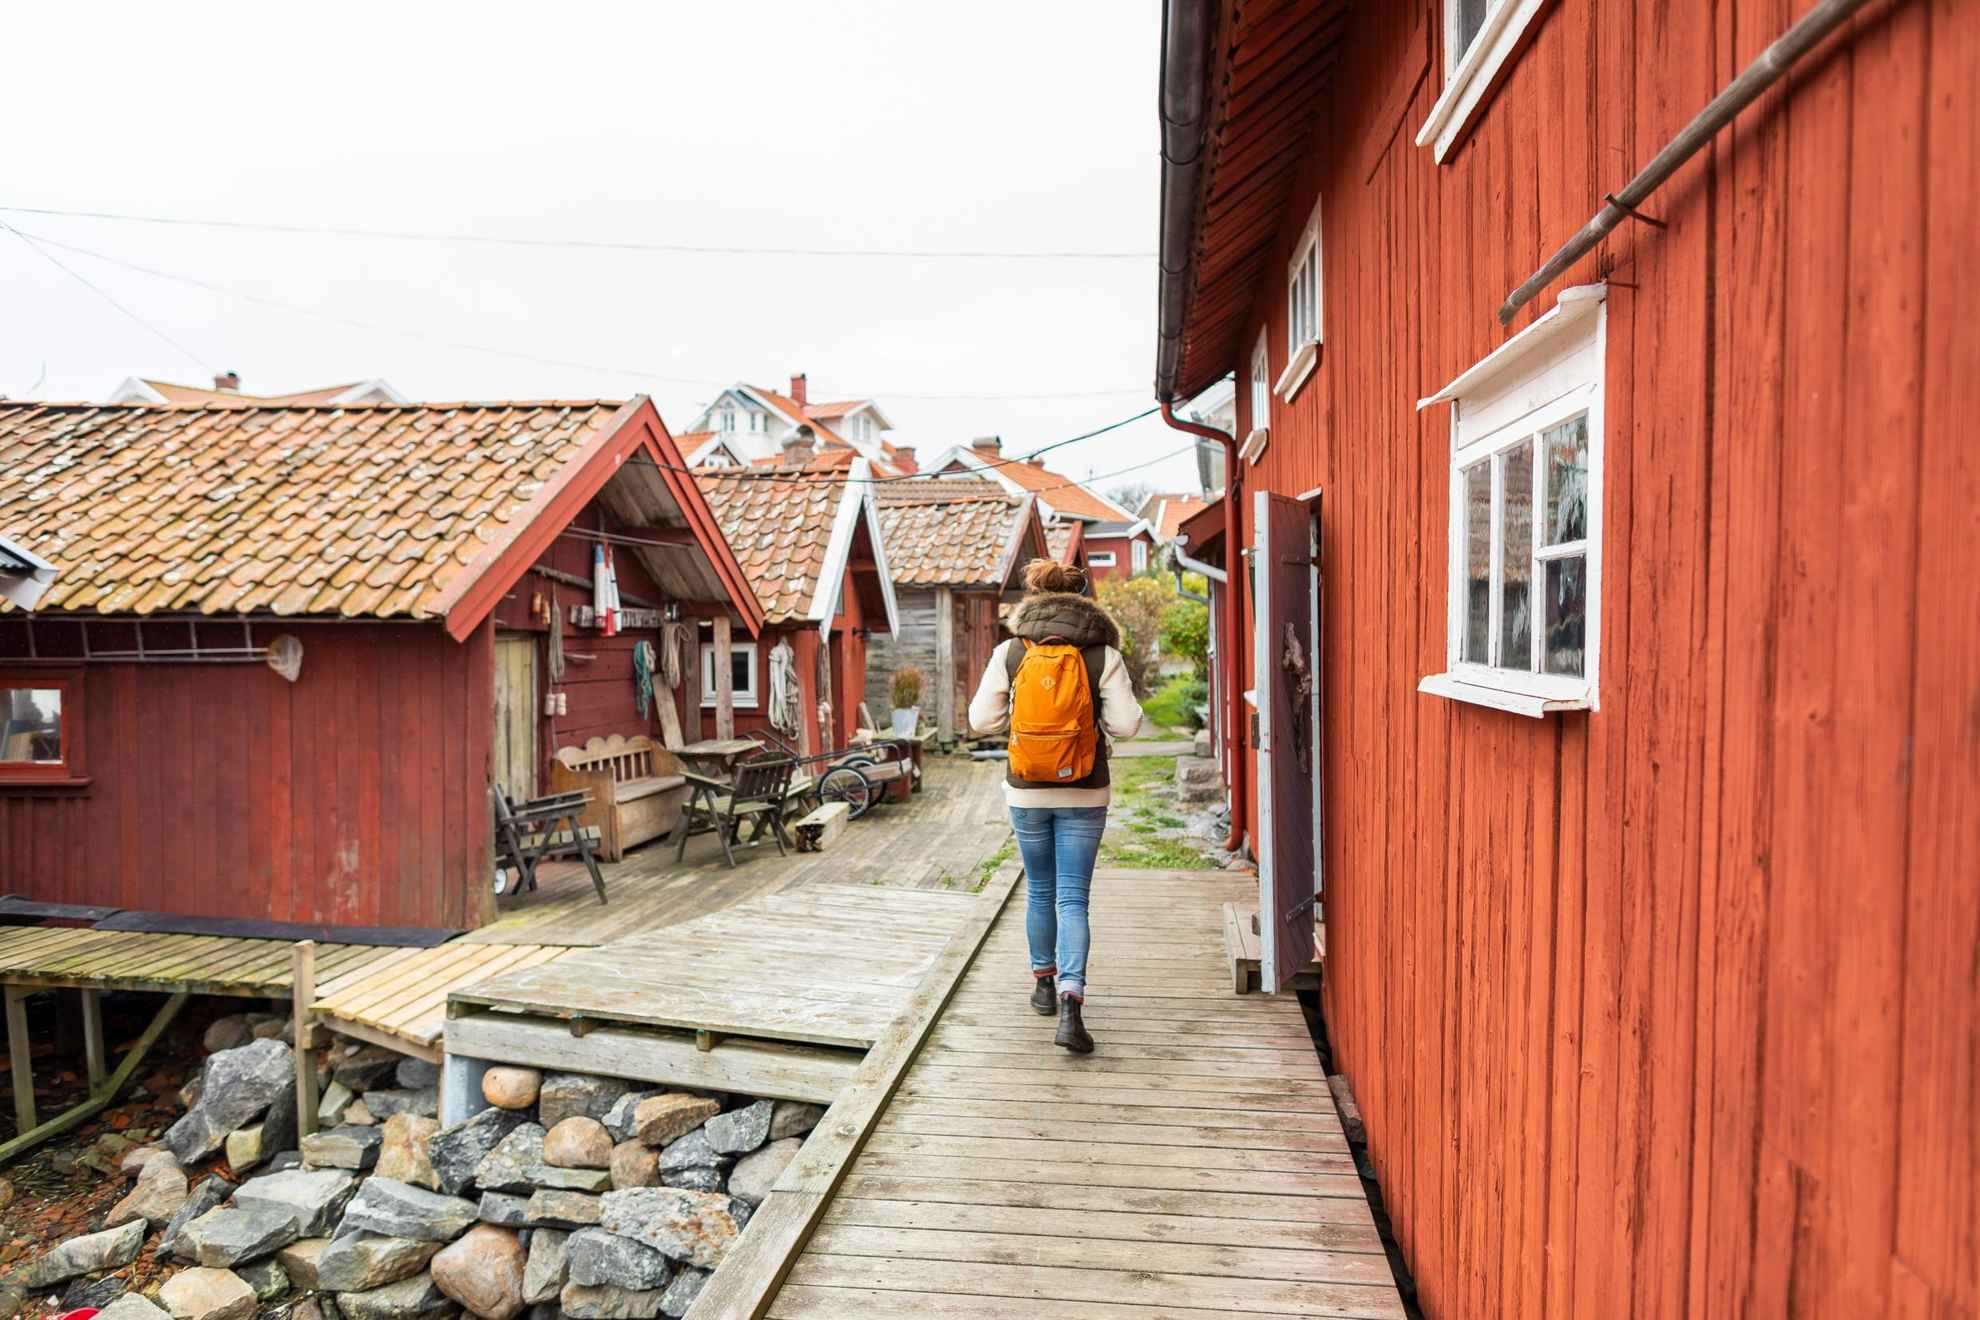 A person with a backpack walks among red wooden houses.